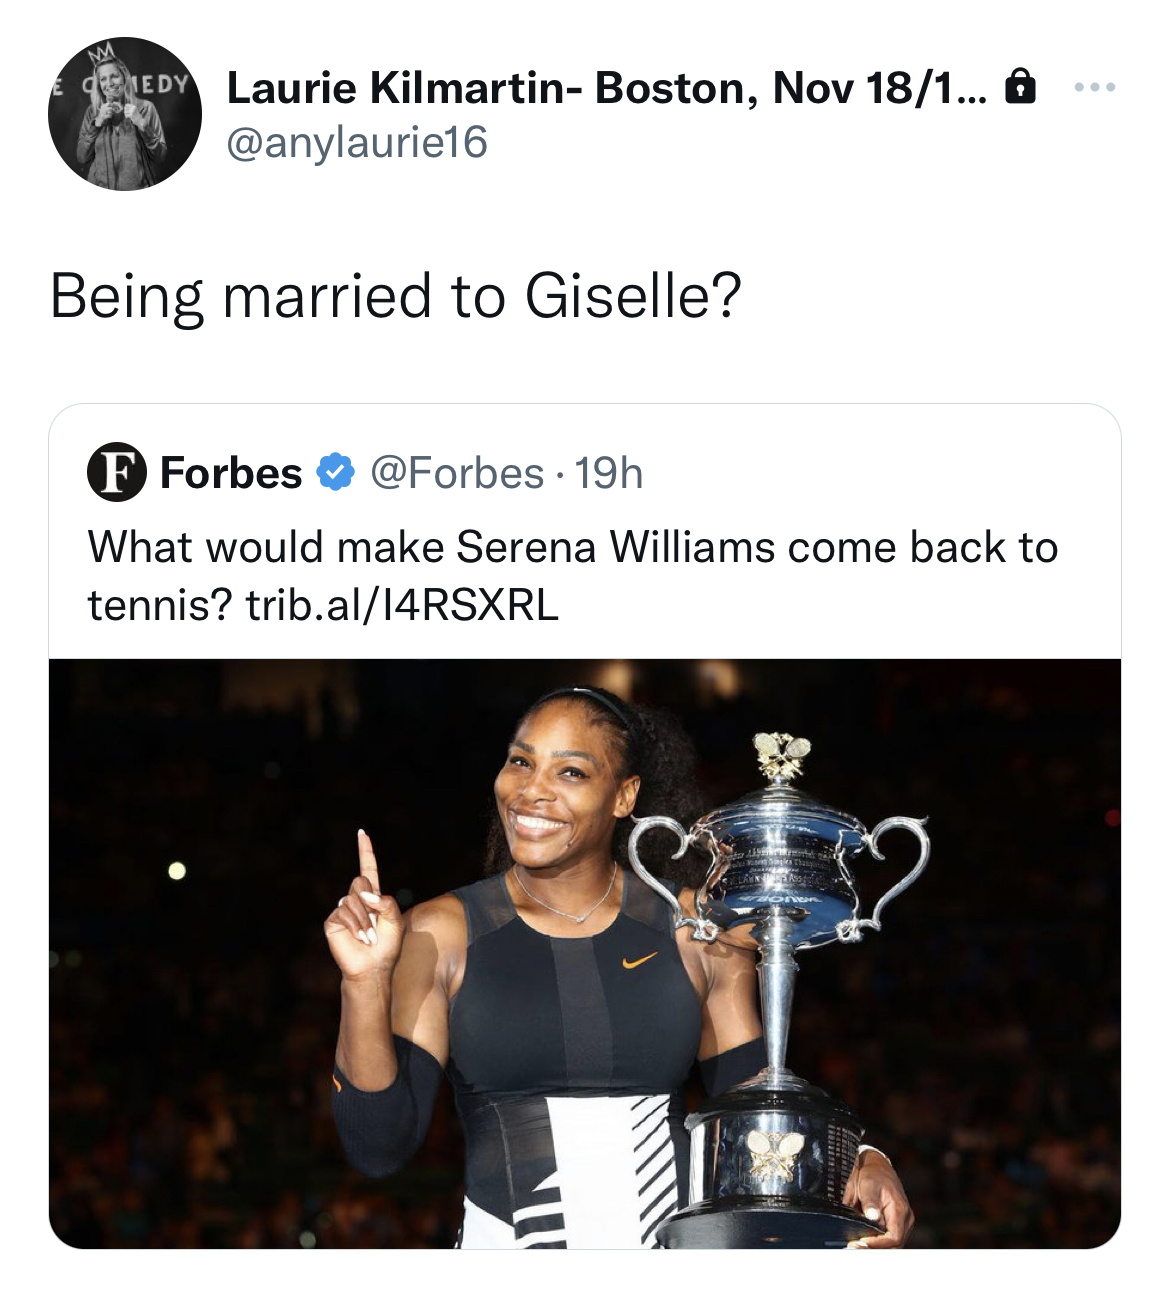 Tweets Roasting Celebs - serena williams winning pregnant - Edy Laurie Kilmartin Boston, Nov 181... Being married to Giselle? Forbes 19h What would make Serena Williams come back to tennis? trib.al14RSXRL